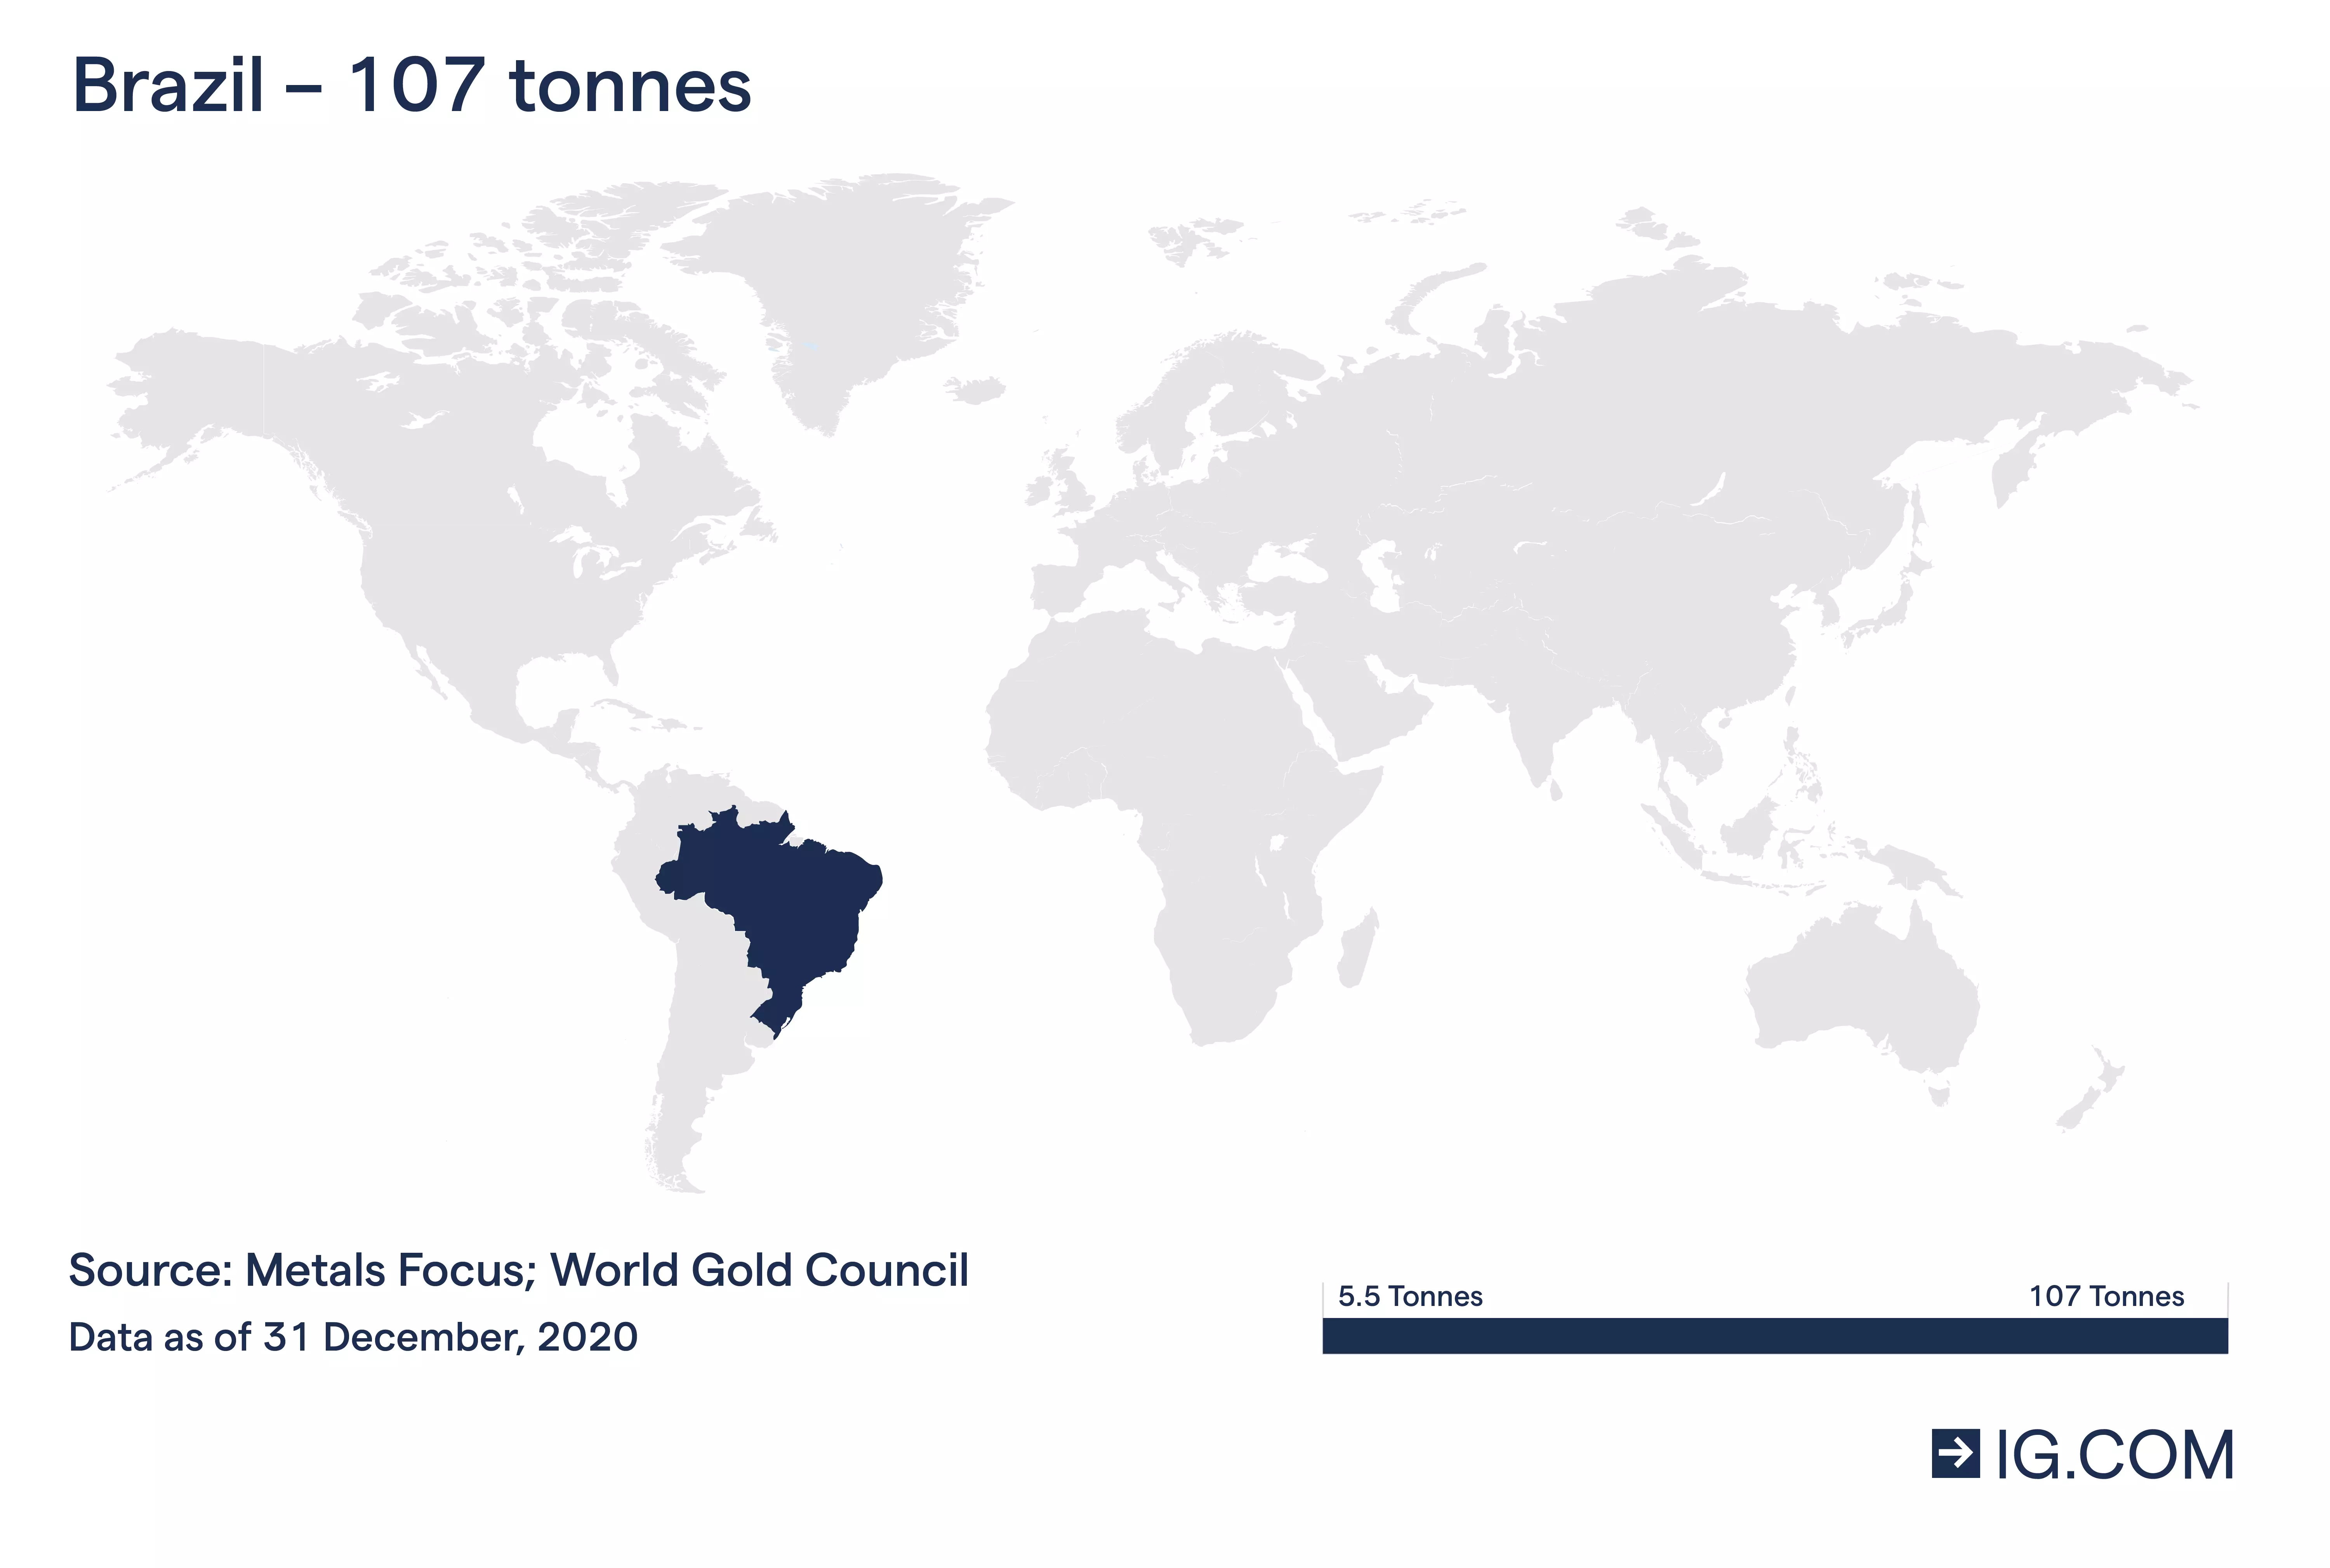 World map showing the contour of Brazil as the world’s seventh largest gold producer